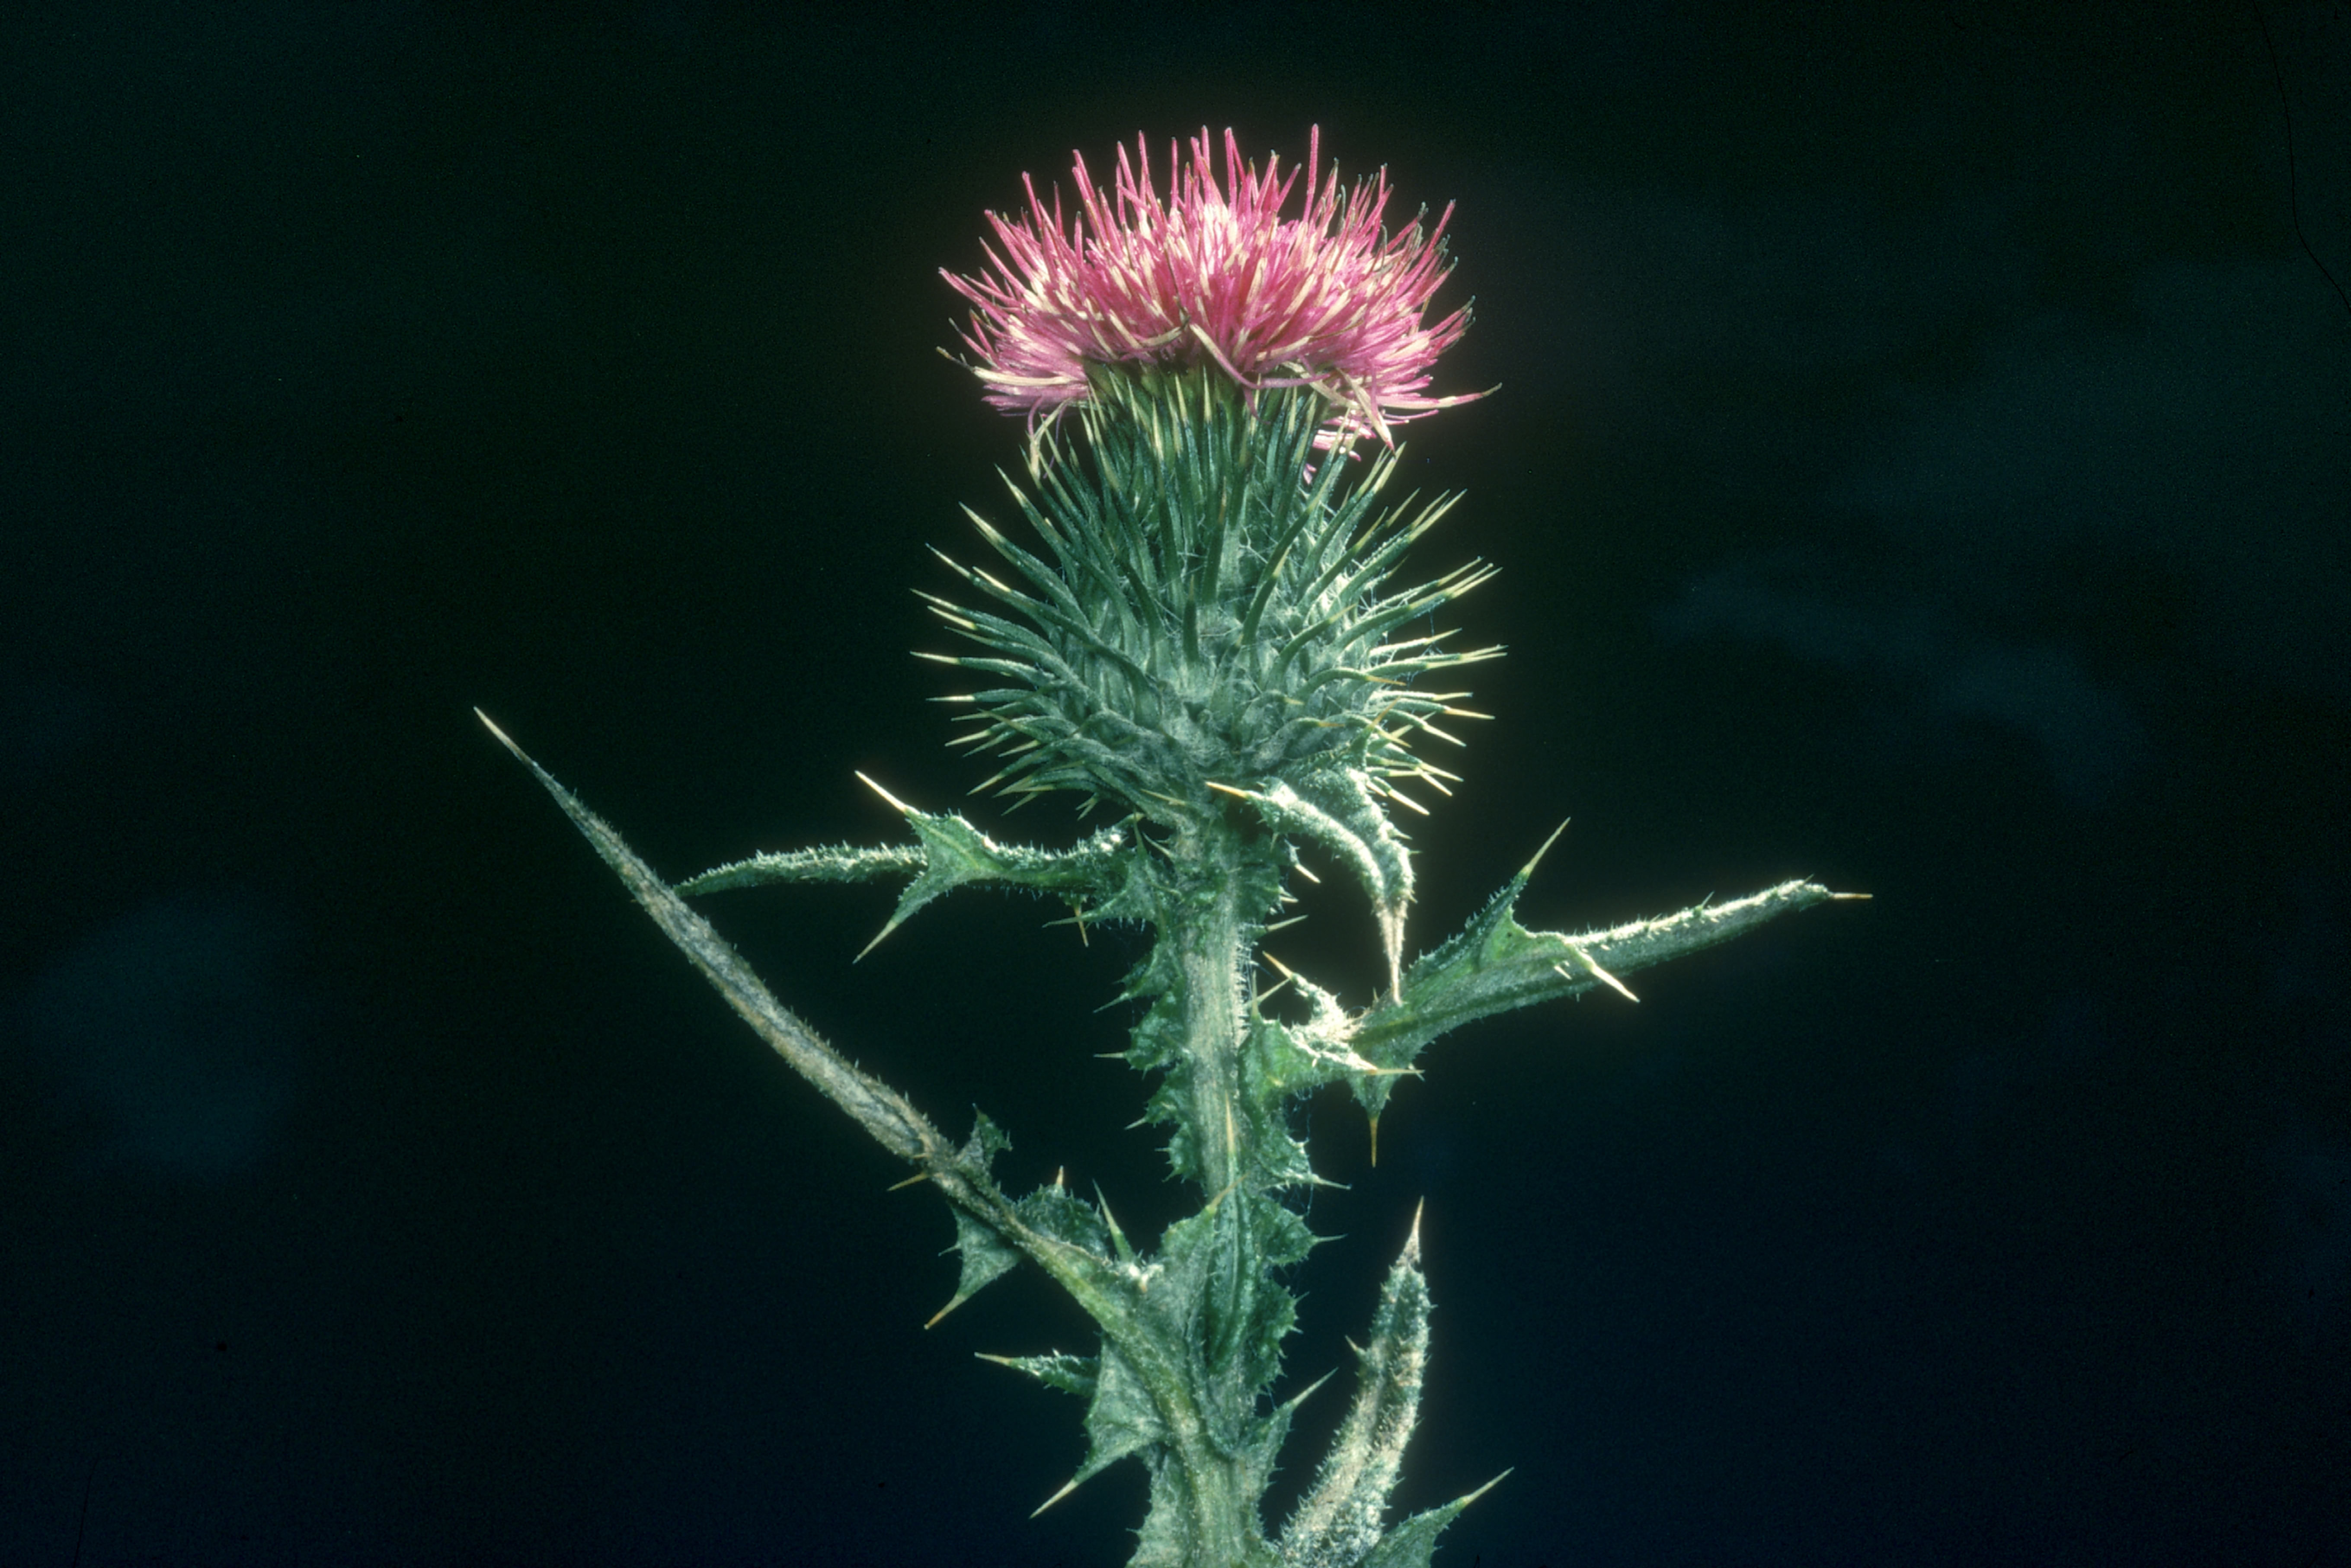 Image of Russian thistle plant with thorns